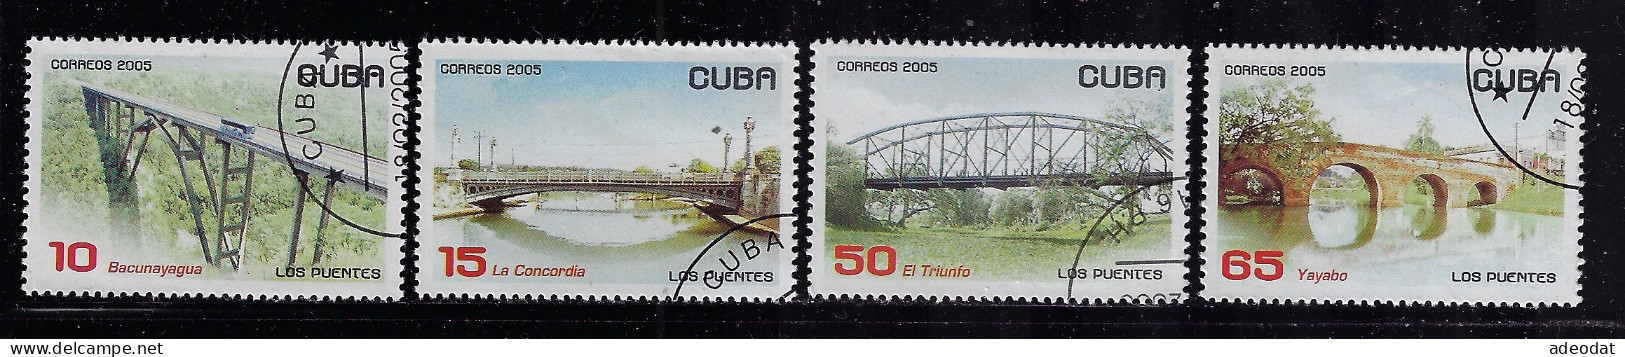 CUBA 2005 SCOTT 4459-4462 CANCELLED - Used Stamps